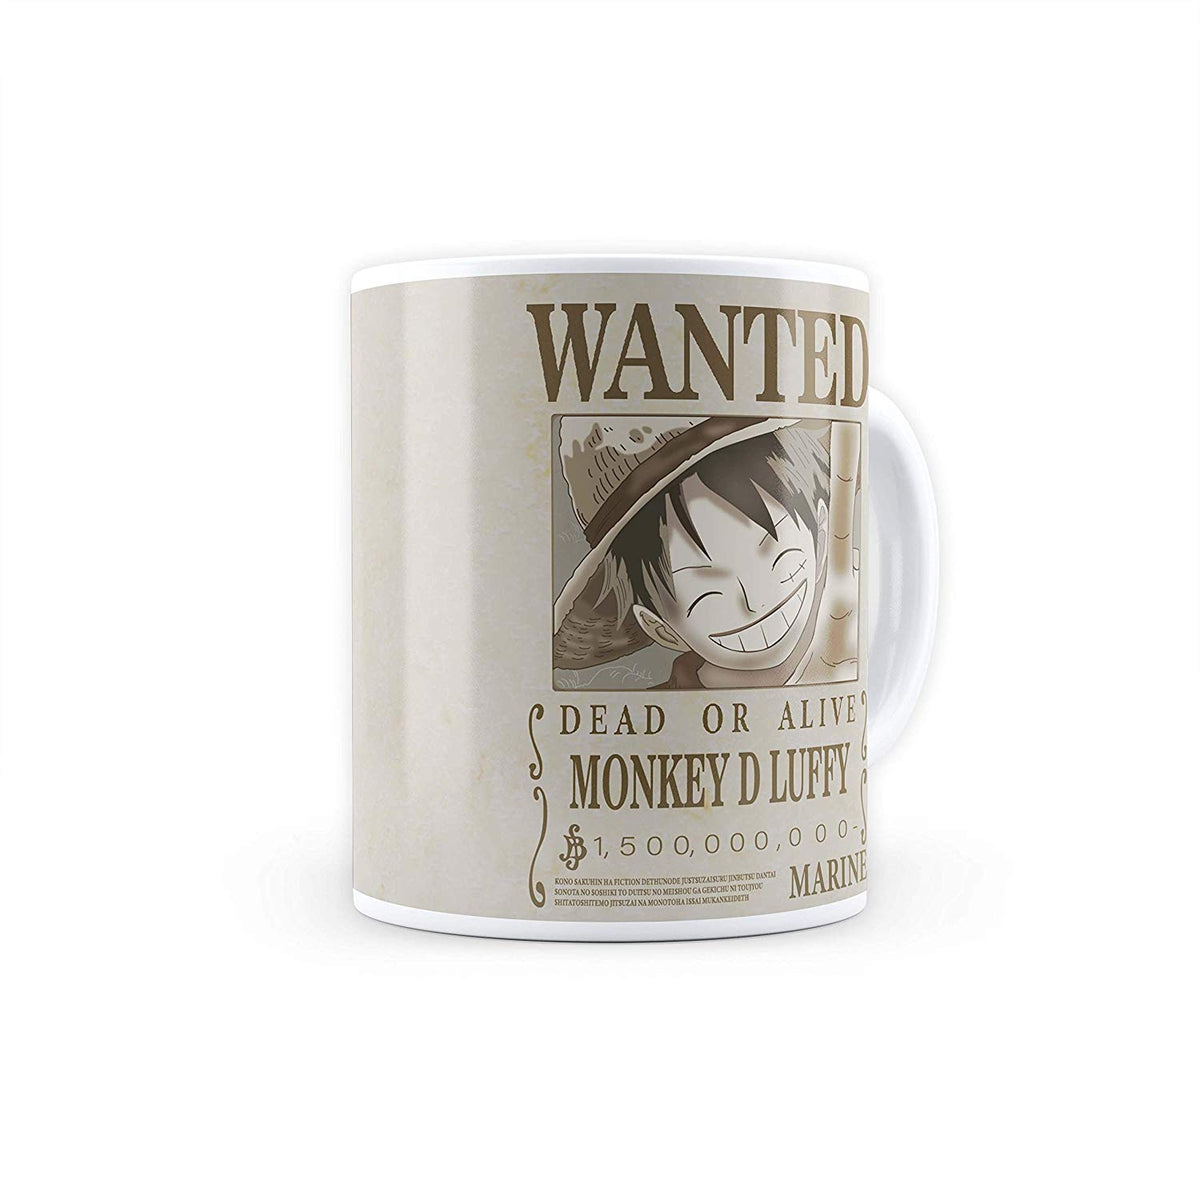 Great Eastern Entertainment Co. One Piece Luffy the King of the Pirates  12oz Ceramic Mug